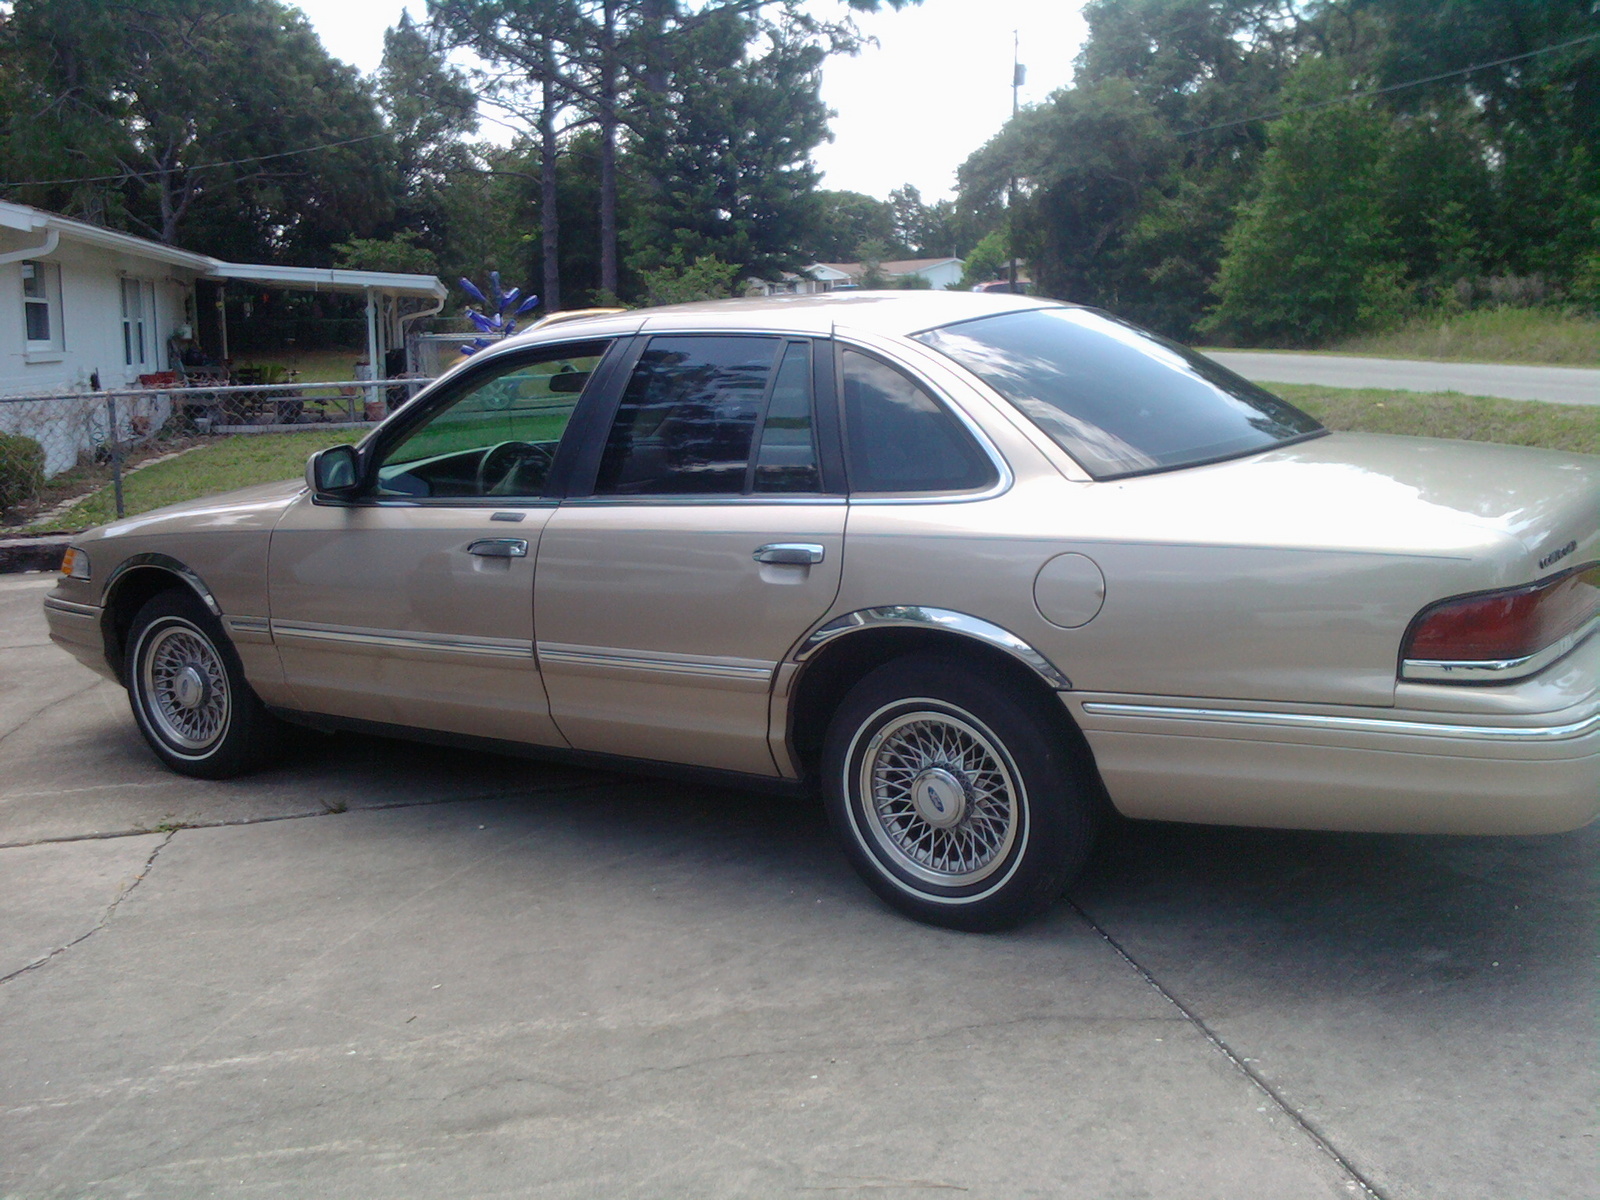 1997 Crown ford picture victoria